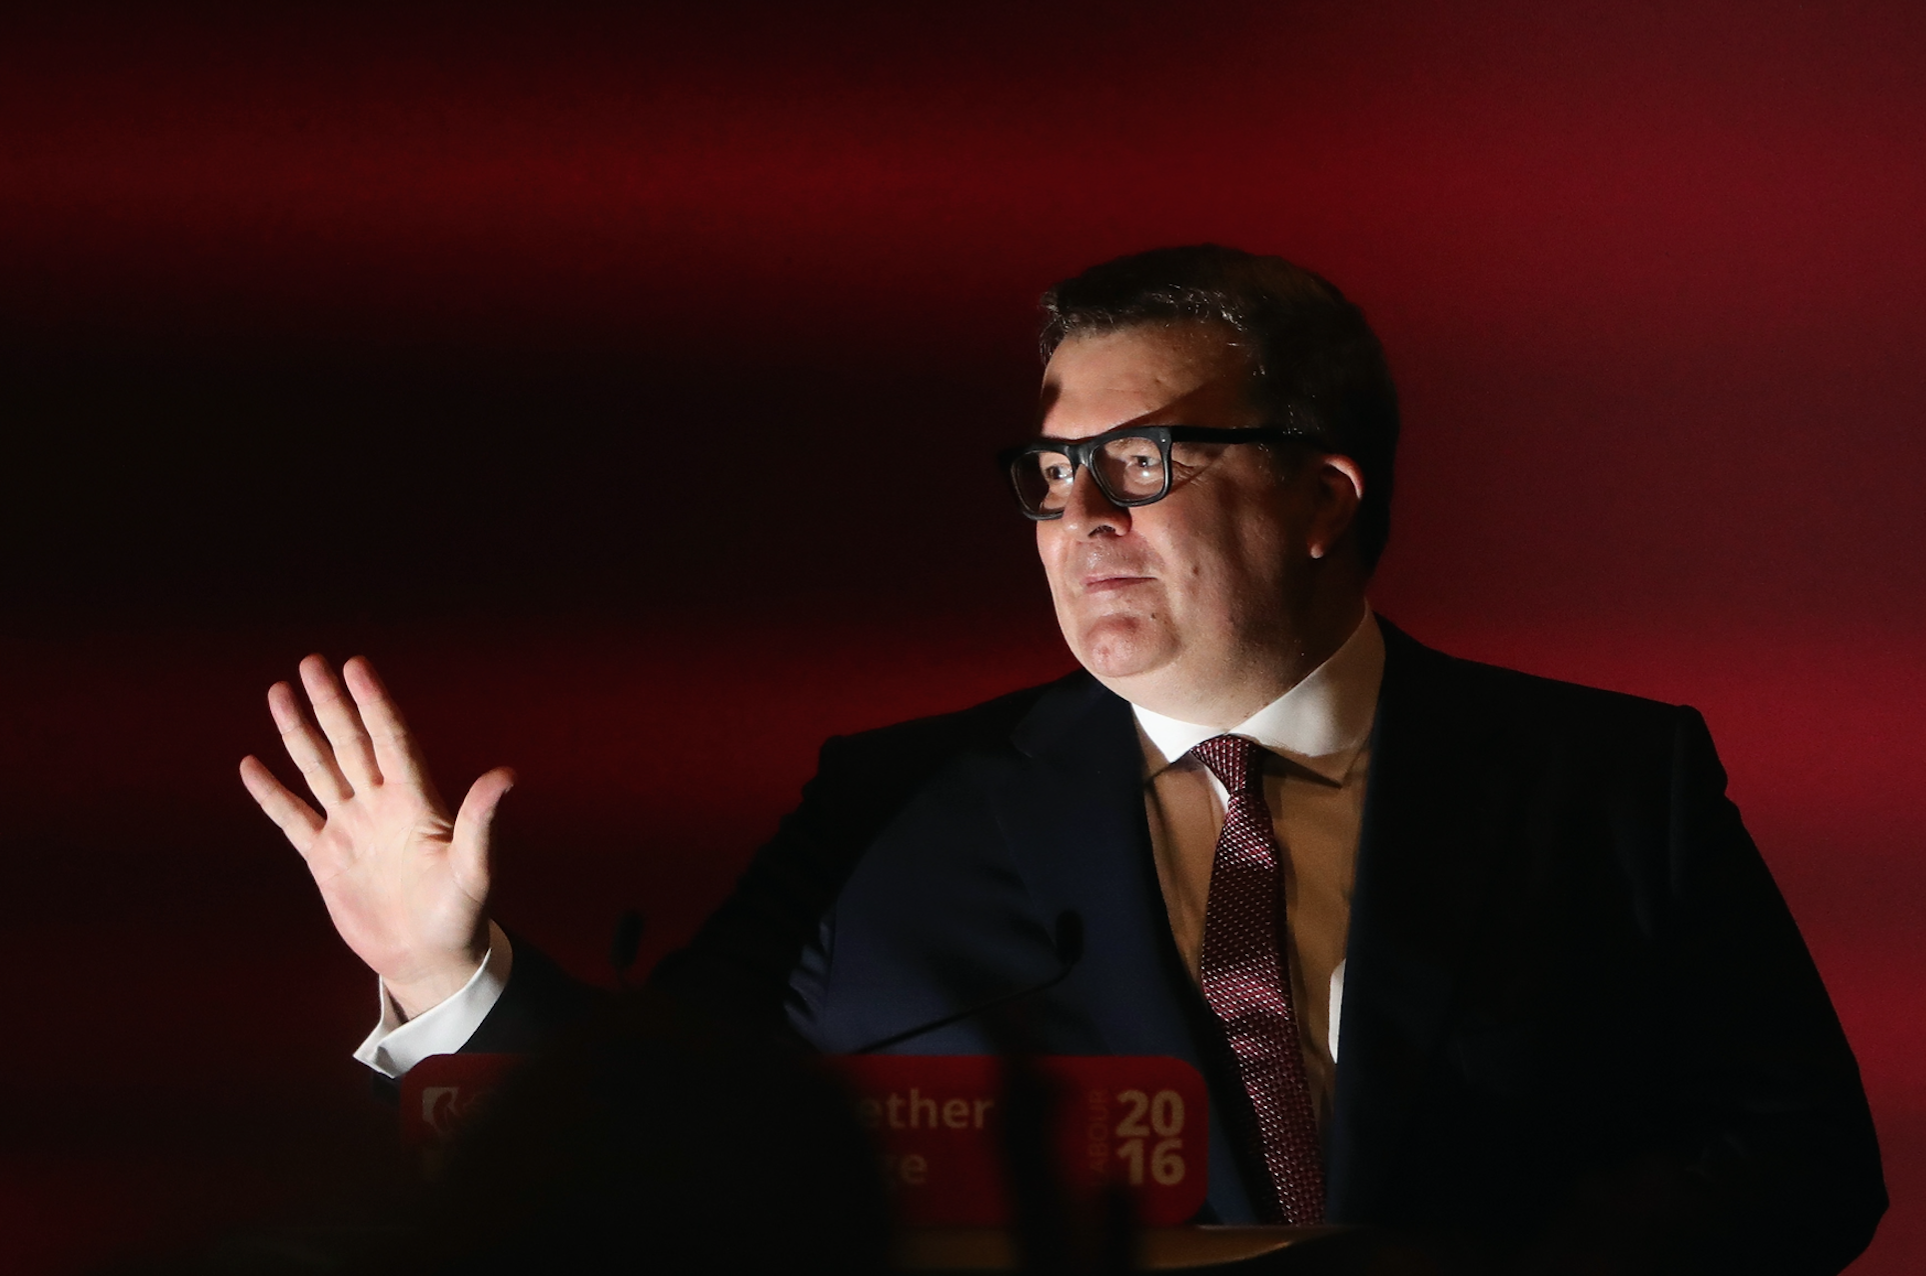 Tom Watson hit back in the row